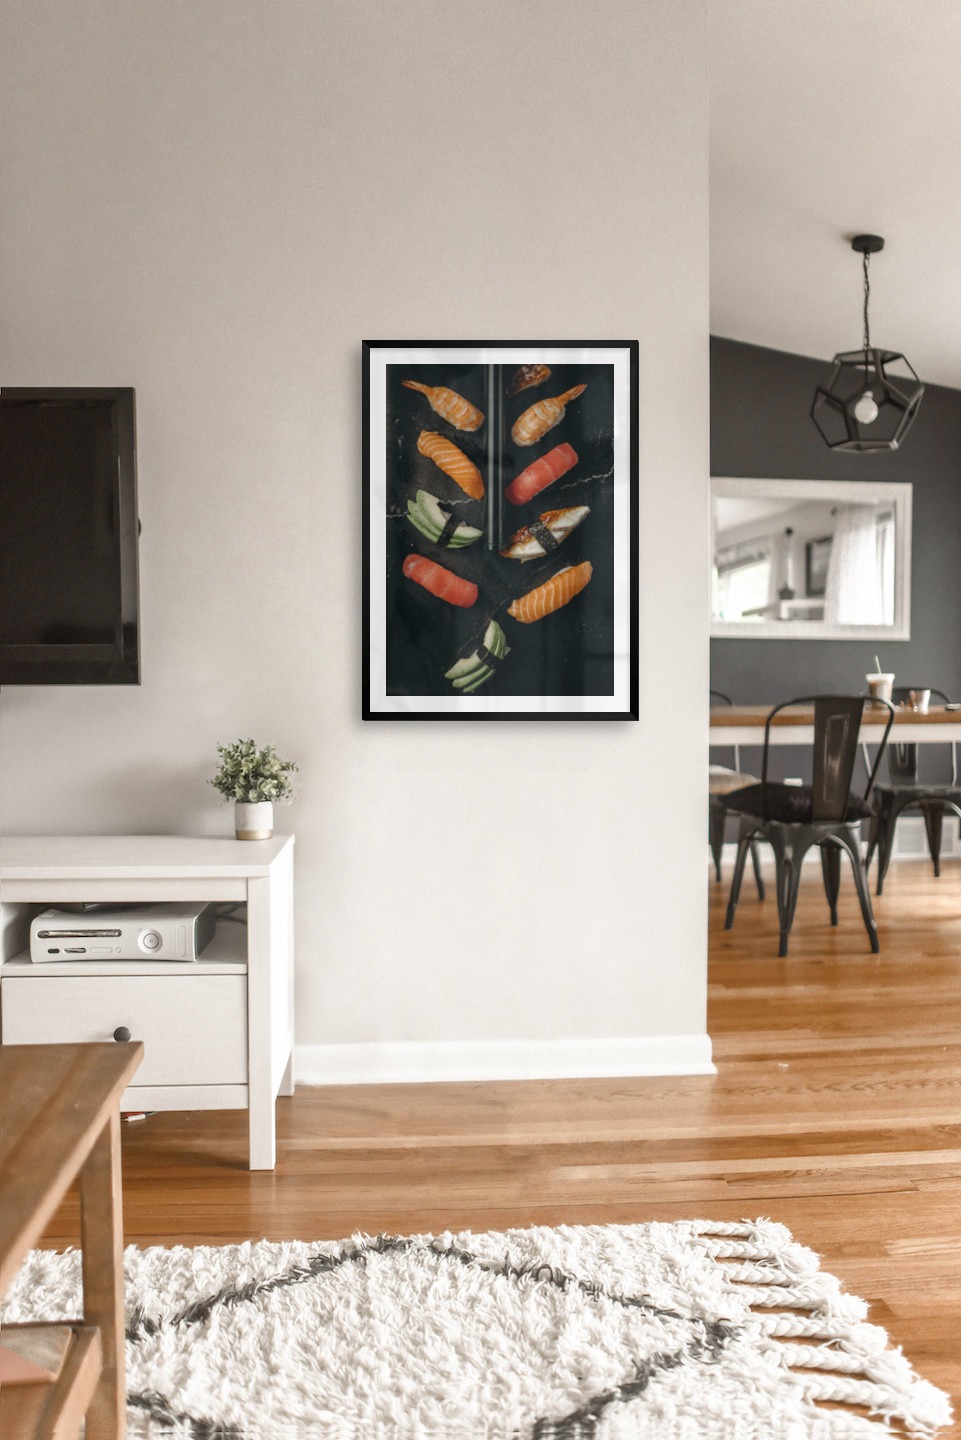 Gallery wall with picture frame in black in size 50x70 with print "Sushi"